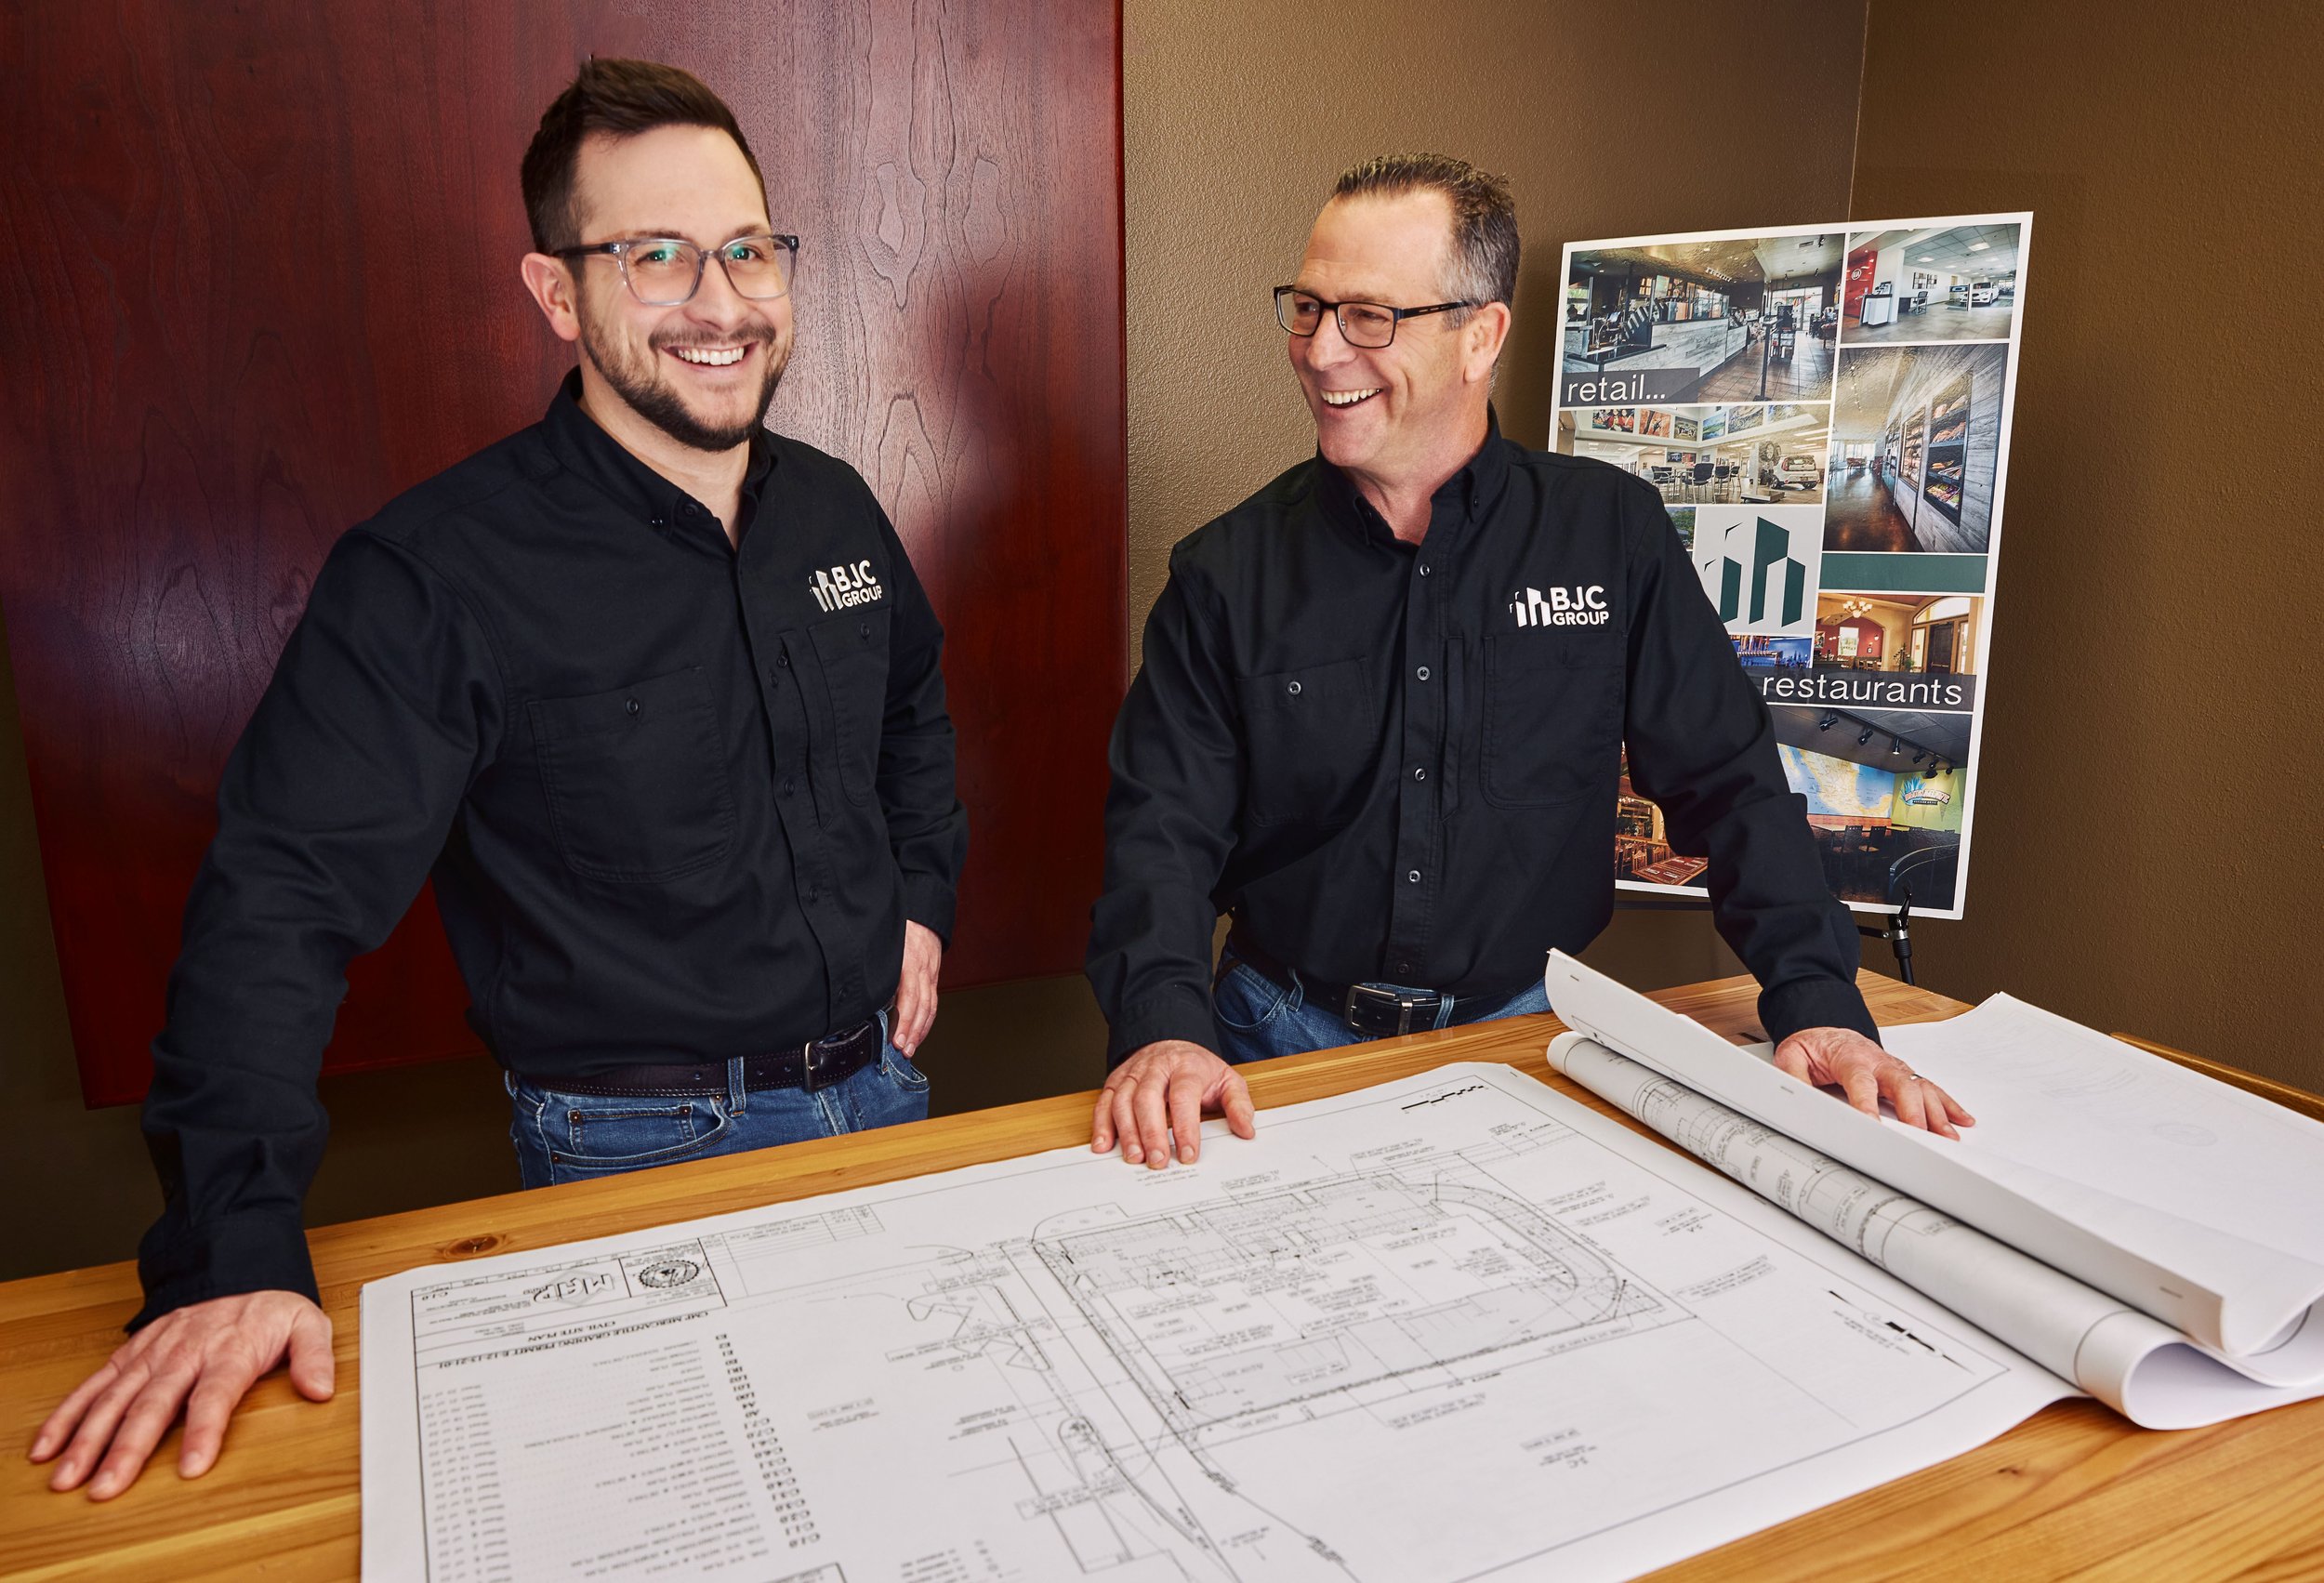   "I want to...thank you for a job well done. &nbsp;Our property managers...have repeatedly commented favorably on the quality of the finished product."    - Jack Chamberlain   Chamberlain Group  